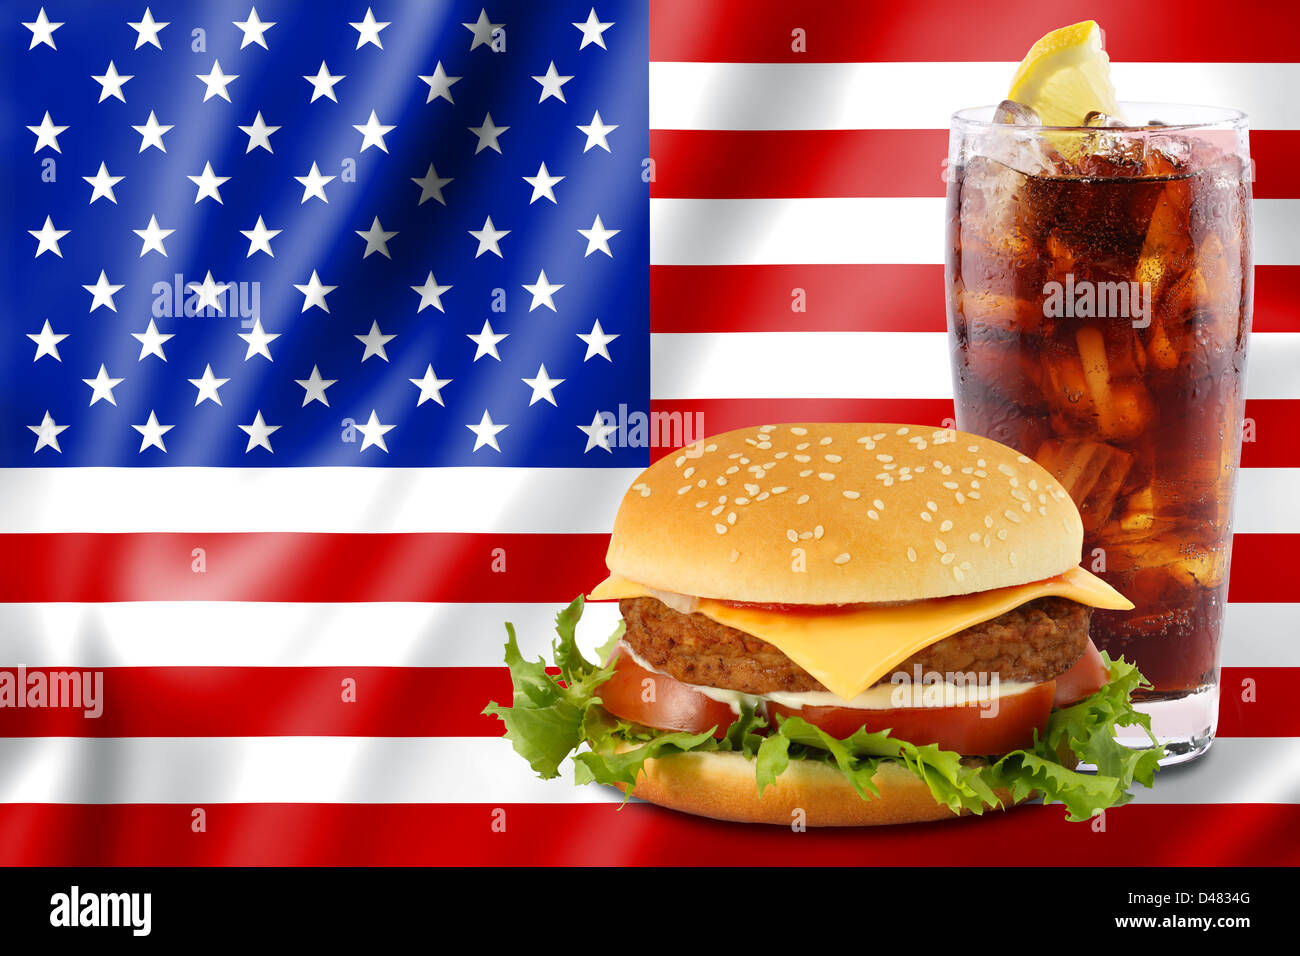 cheeseburger and soda in front of the american flag. Stock Photo